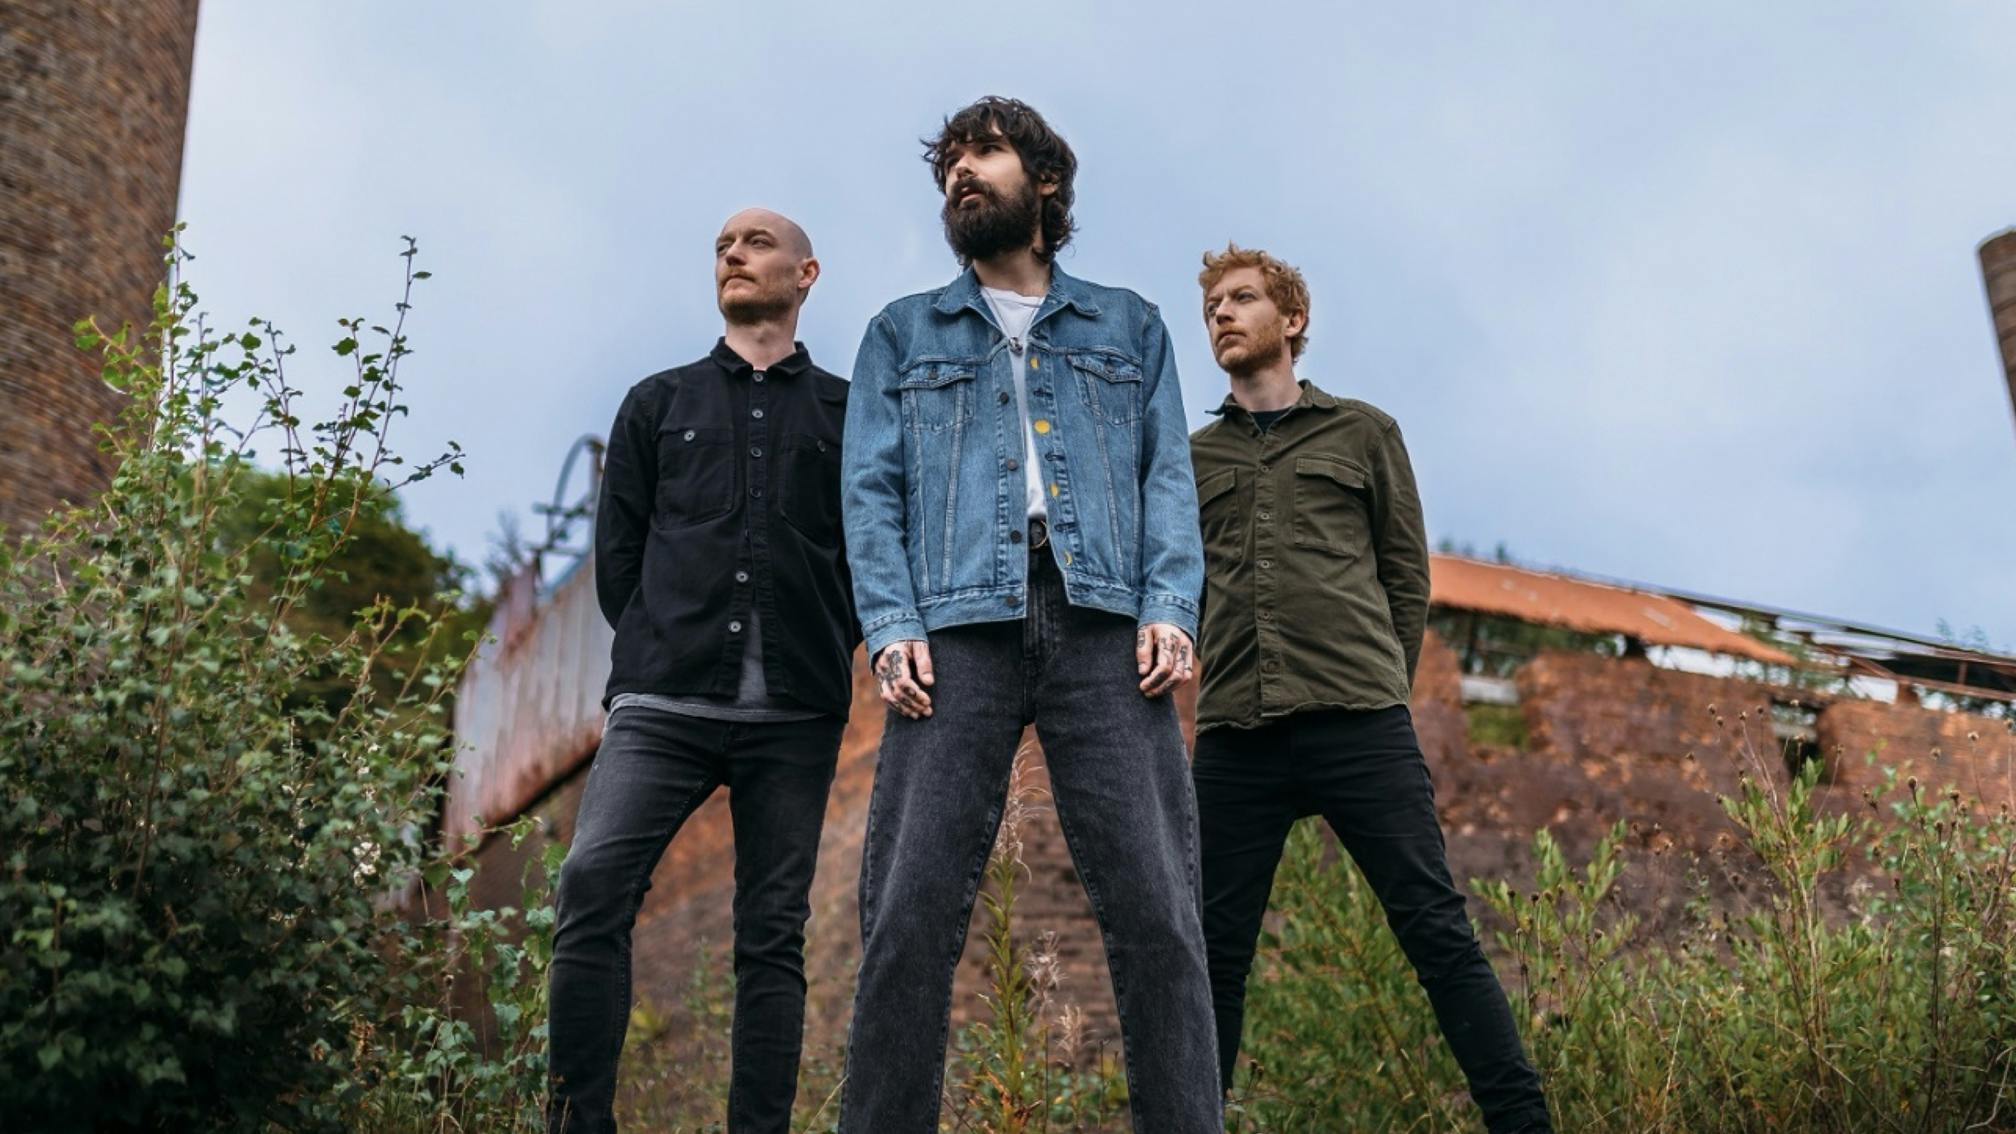 Listen to Biffy Clyro's new single, A Hunger In Your Haunt